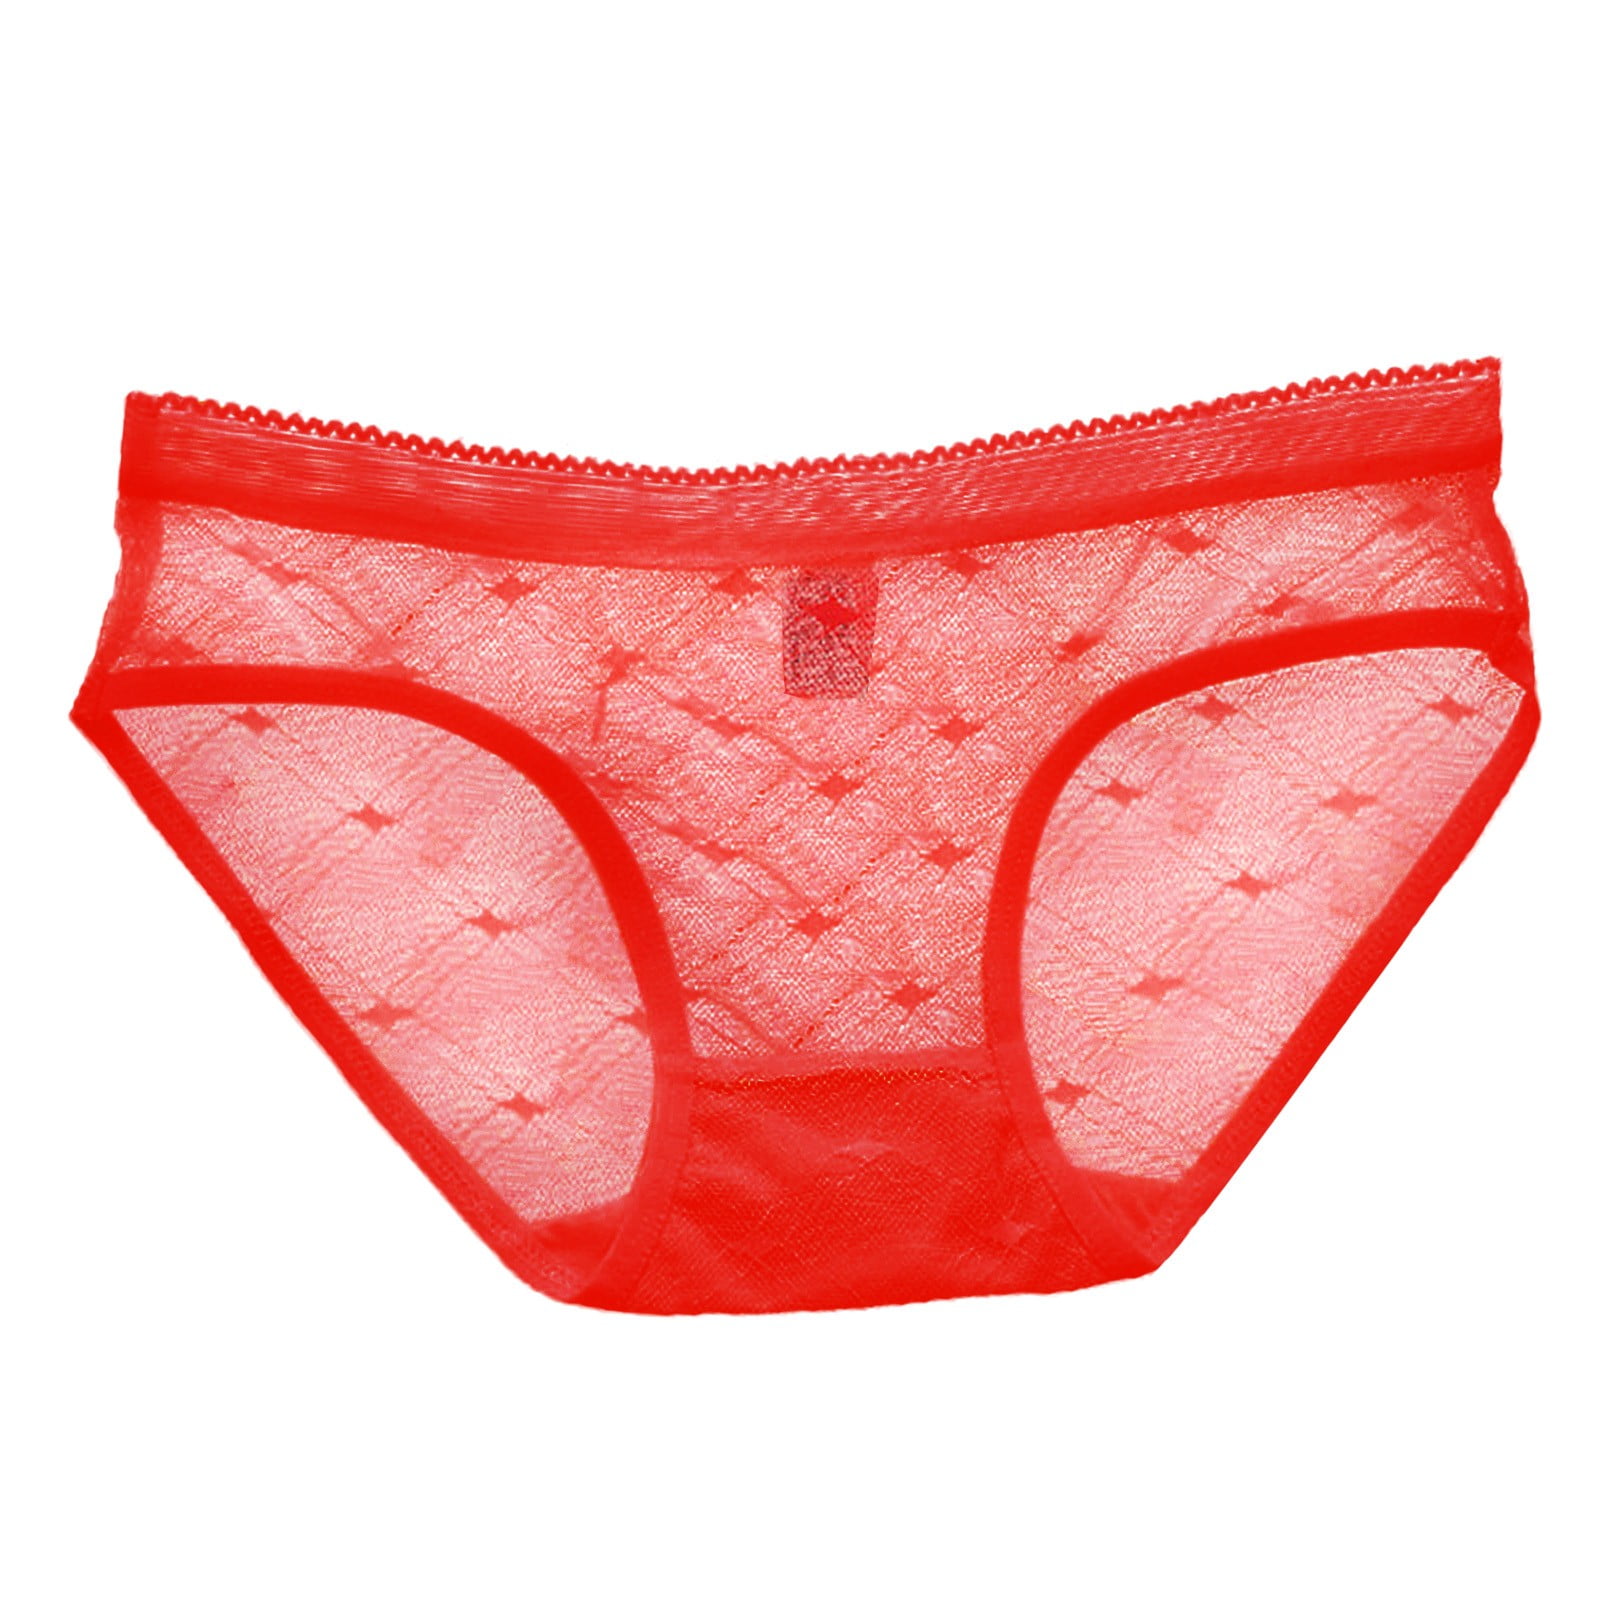 Underwear for Women Sheer Lace See Through Mesh Cotton Crotch Seamless Briefs  Panties for Women 